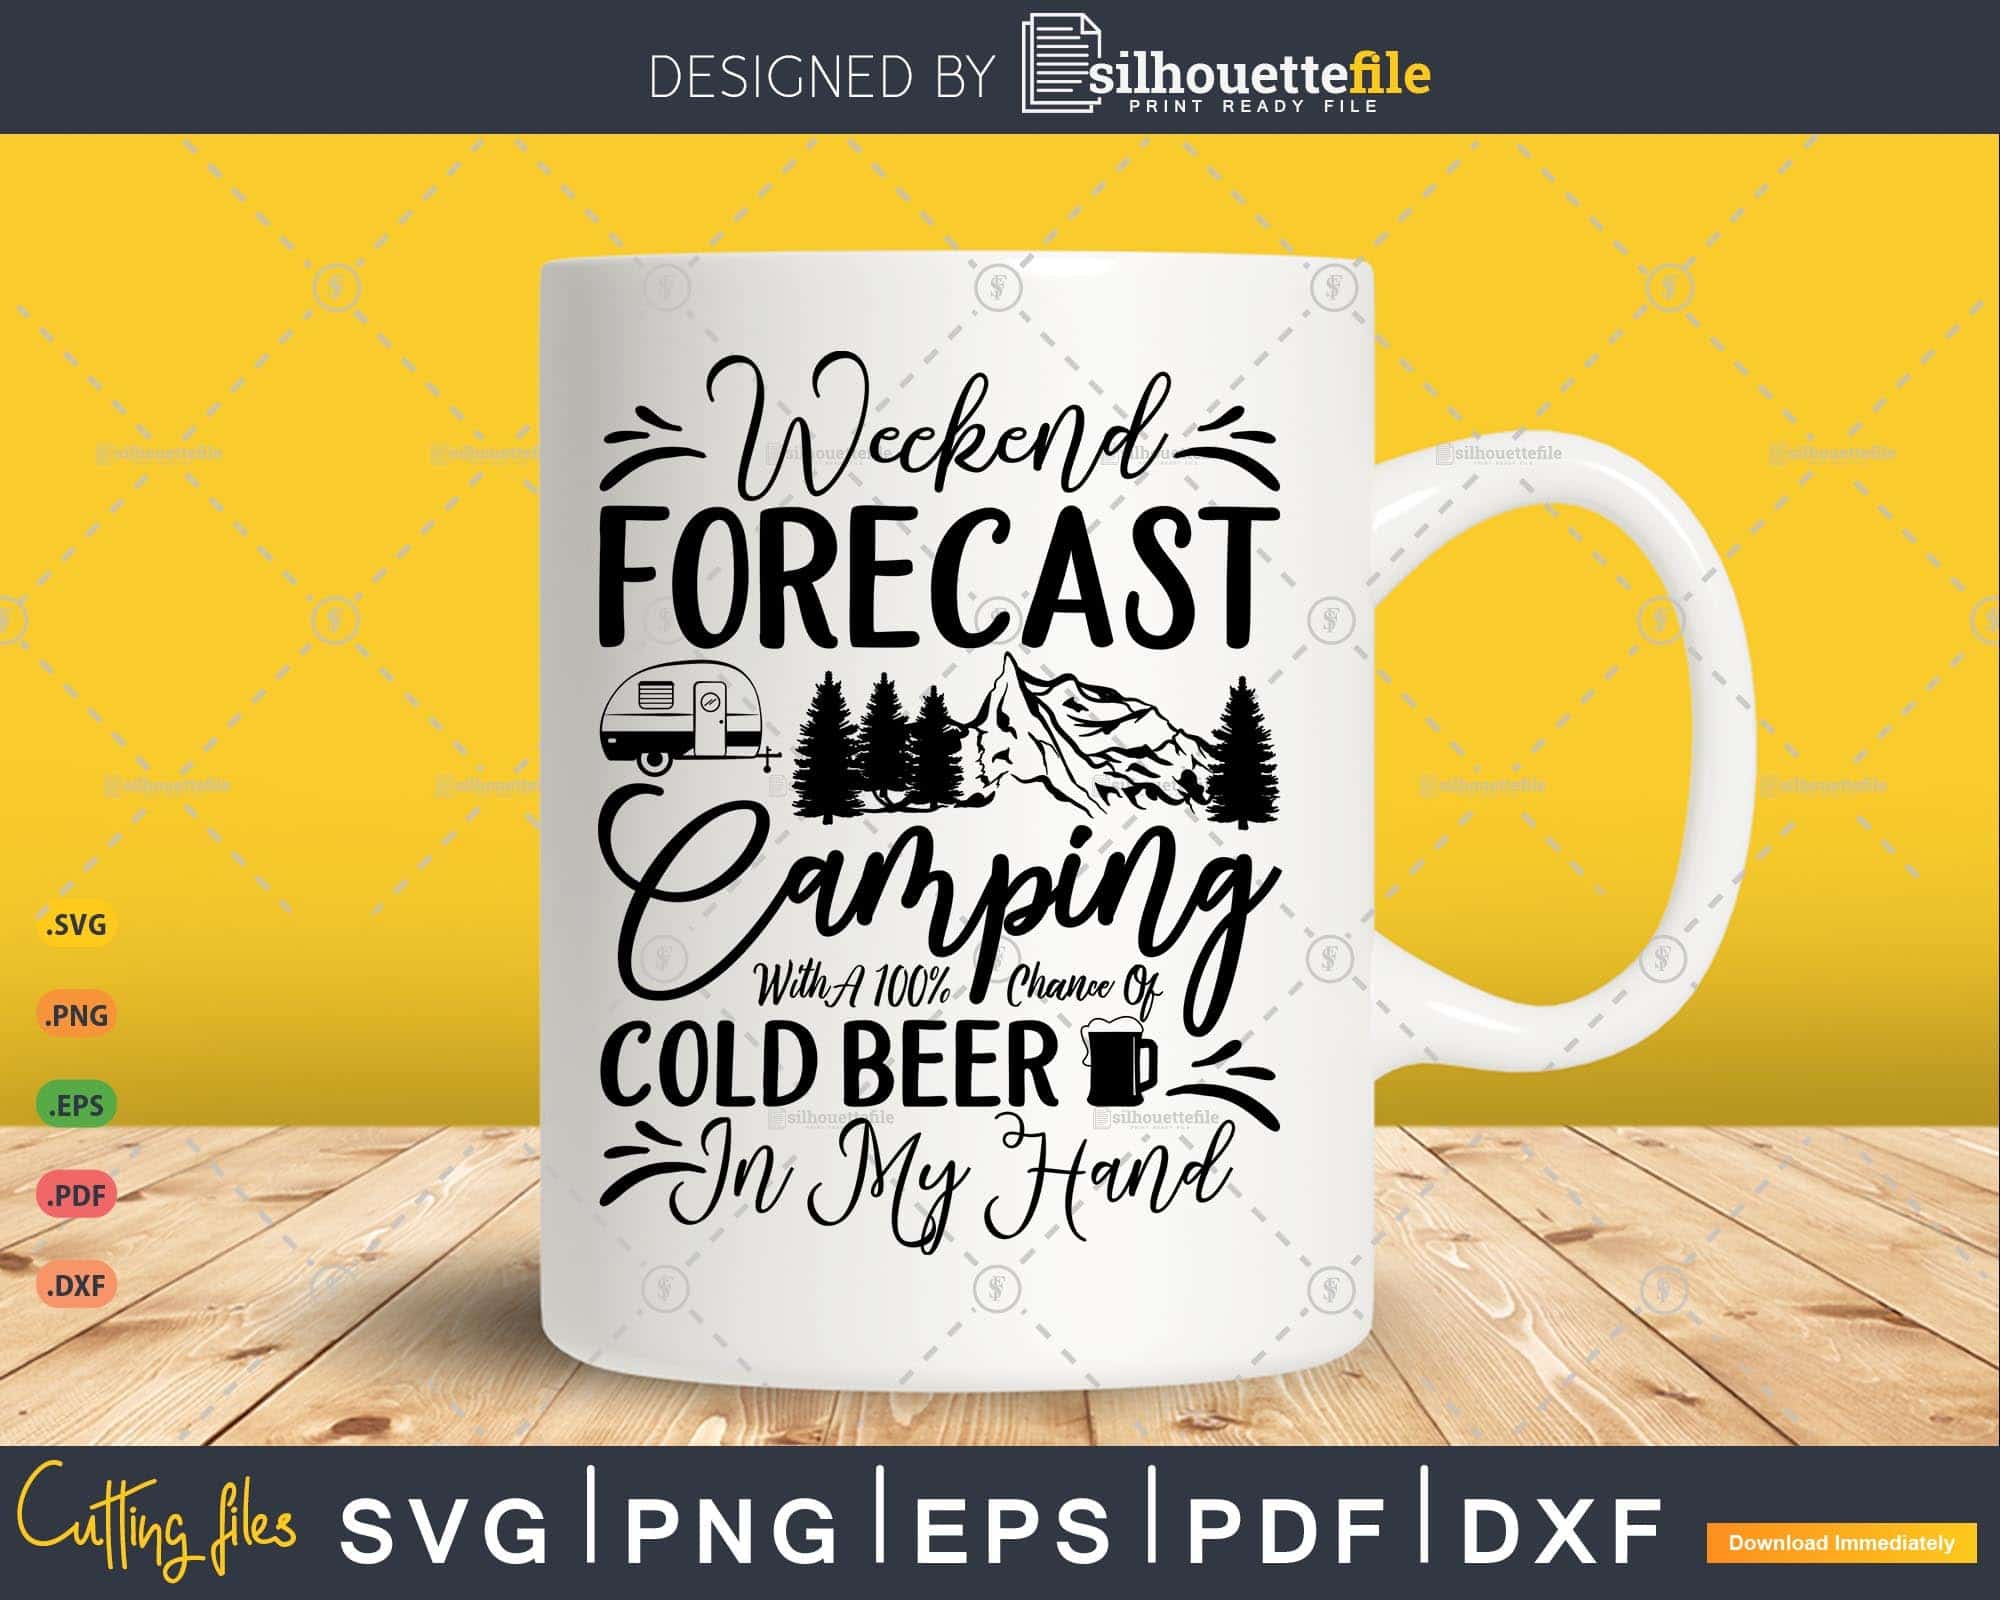 Weekend Forecast Camping With A Good Chance Of Drinking, Svg File Formats -  free svg files for cricut